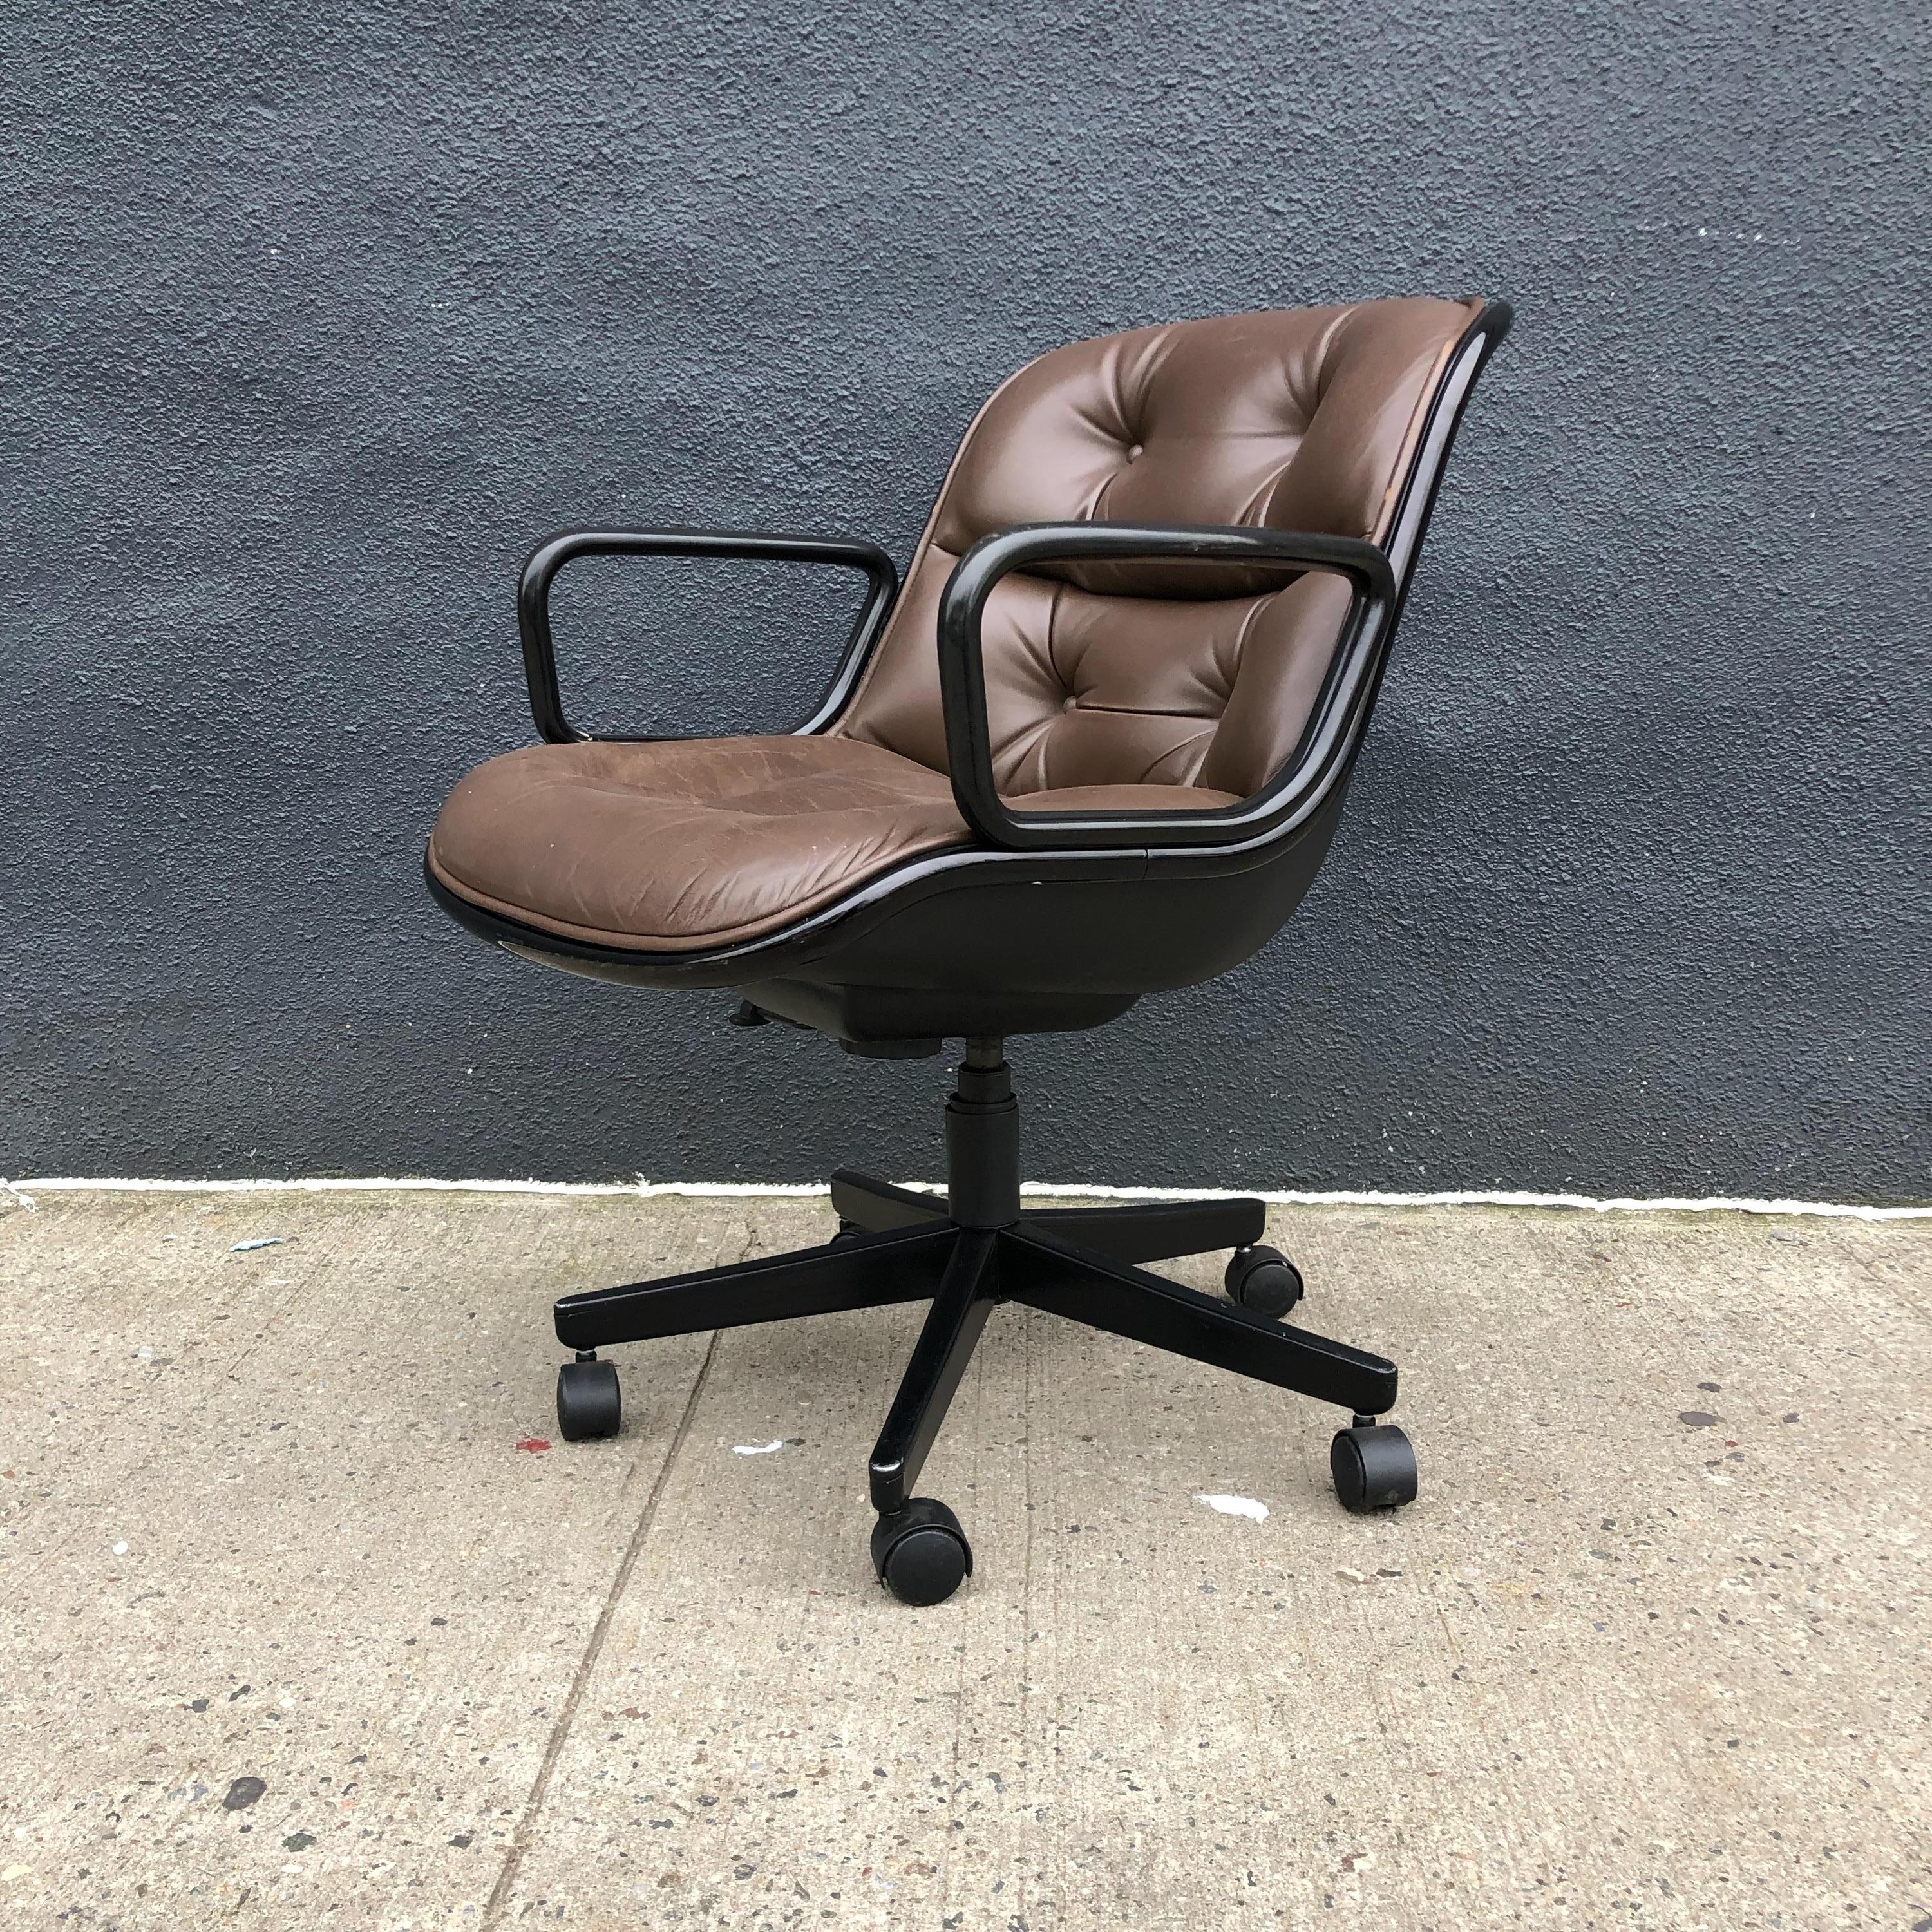 For your consideration are icons of Mid-Century Modern design office chairs by Charles Pollock for Knoll. 

These chairs, with a hard plastic back, aluminium frame and tufted leather seat, revolutionized office seating. They have been in